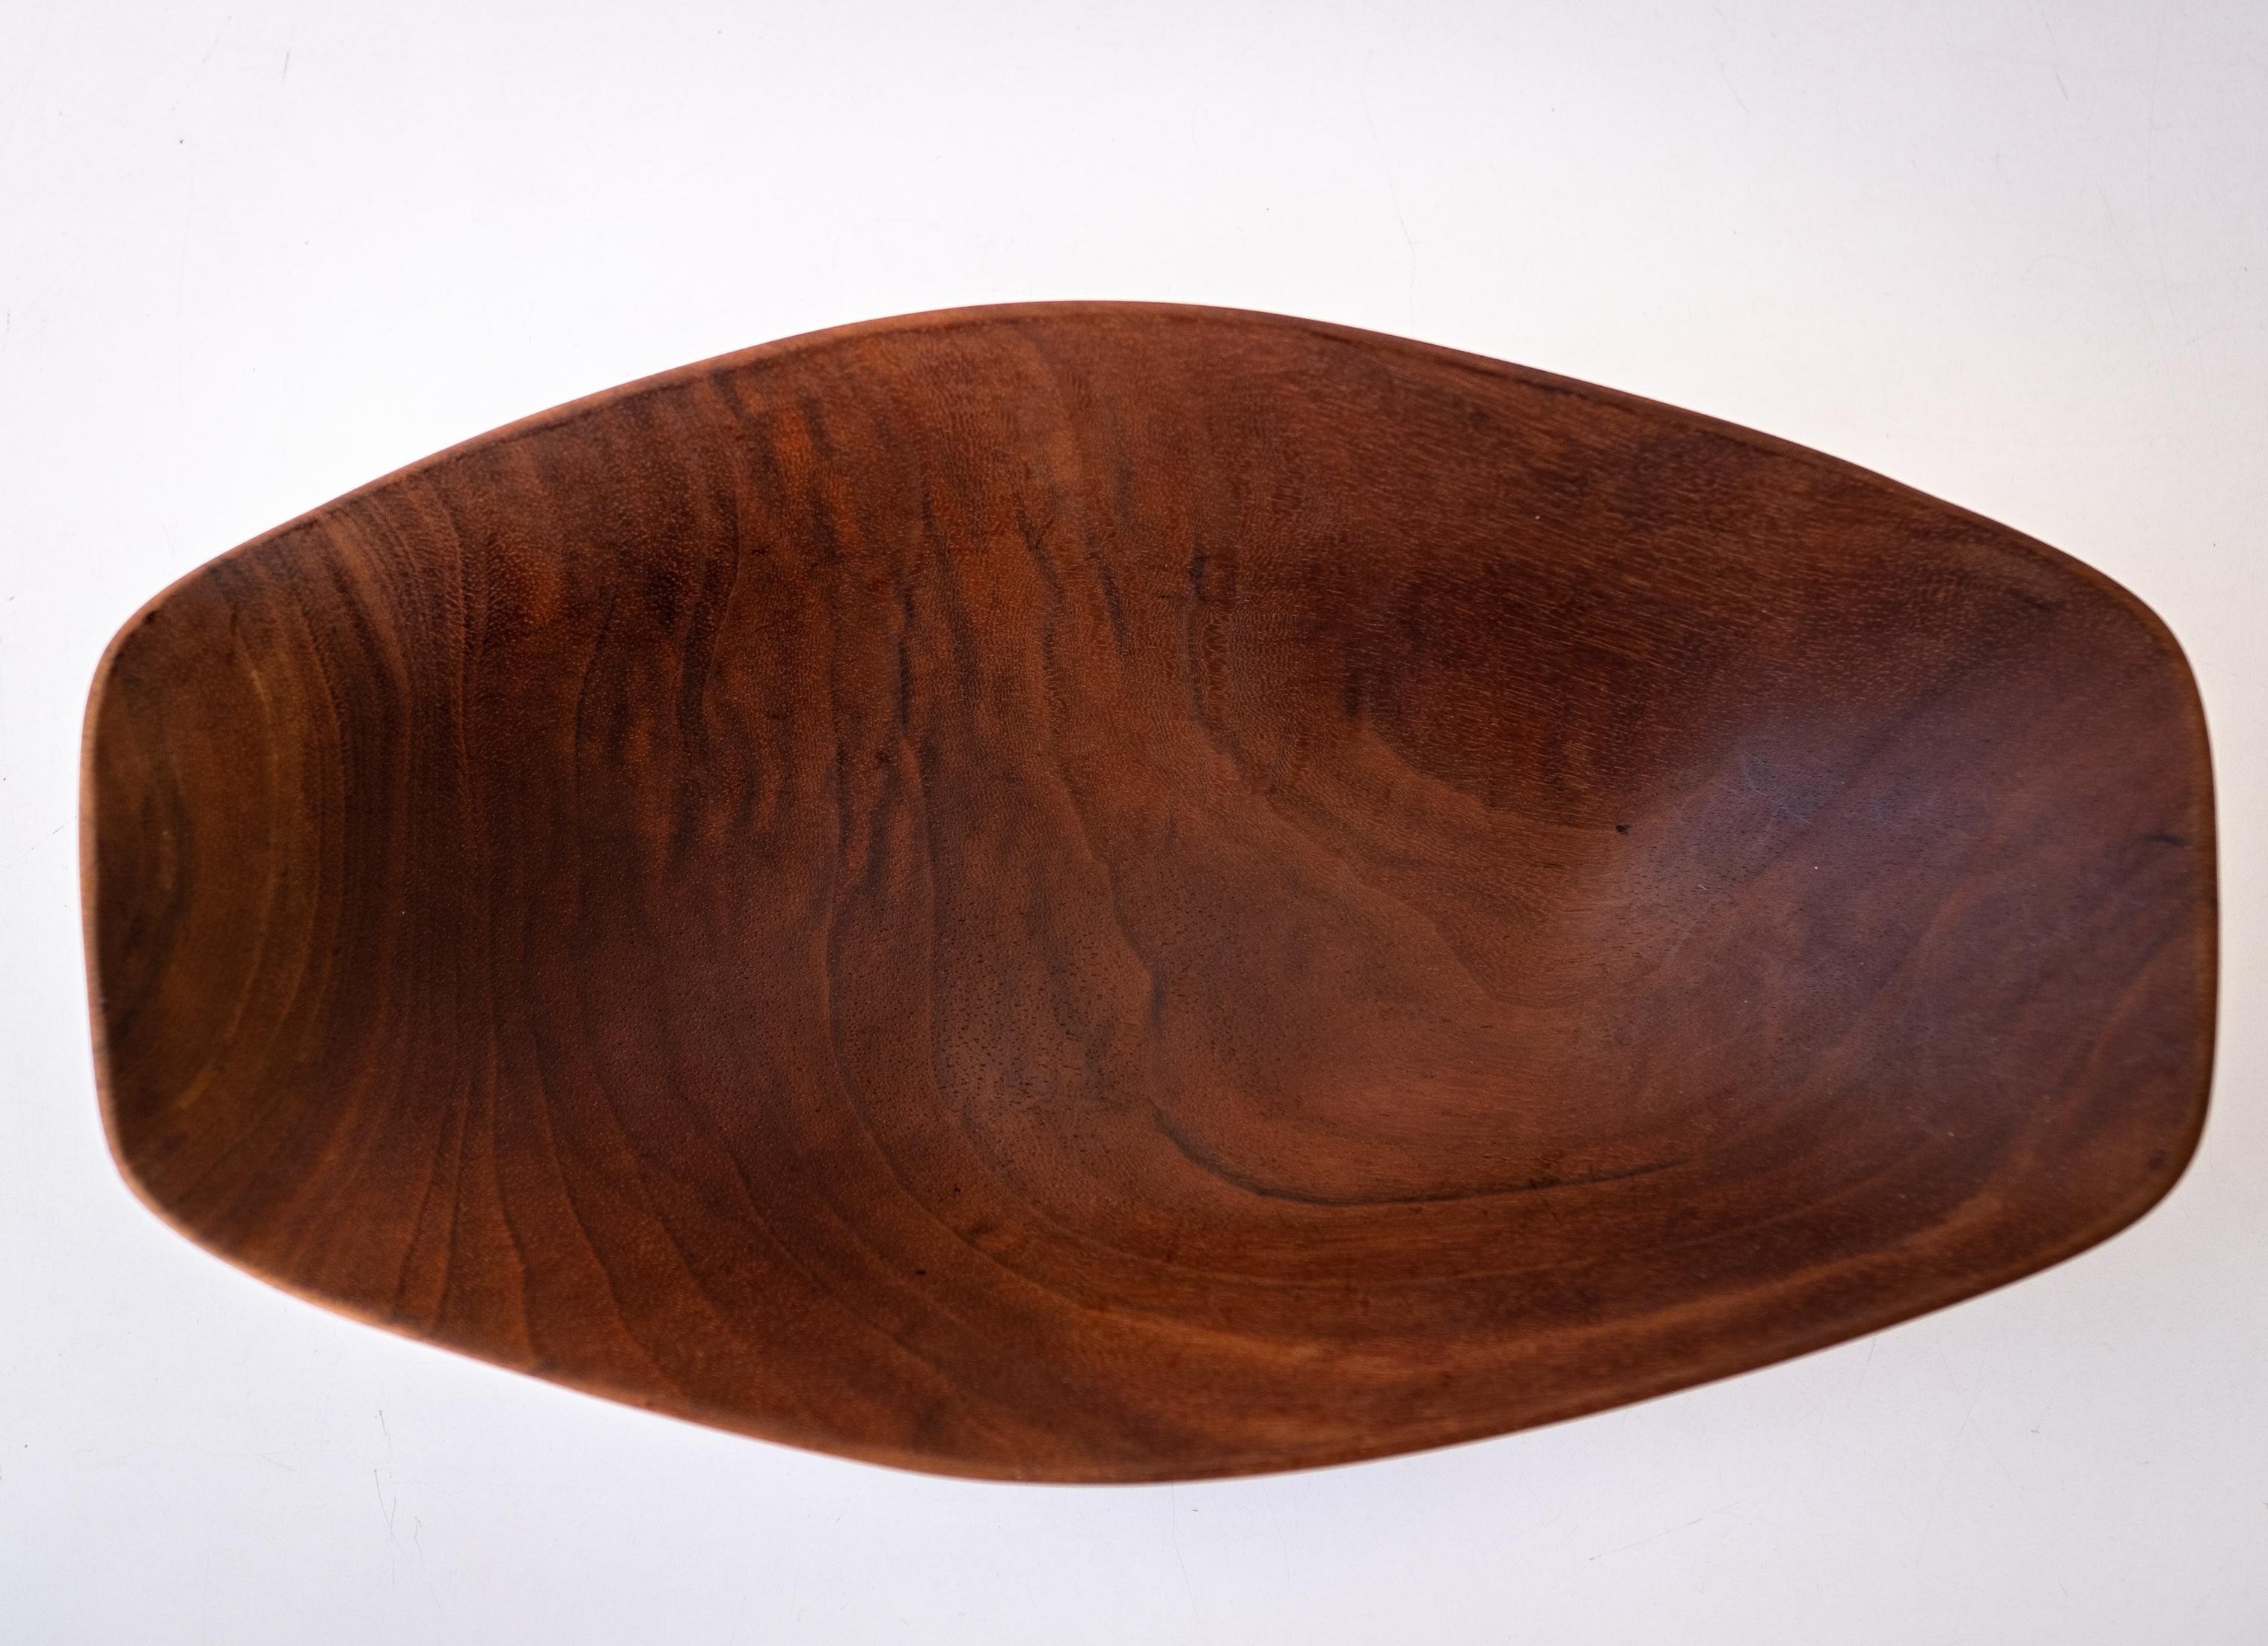 Wood Midcentury Bowl by Mexican Modernist Don Shoemaker 1960s